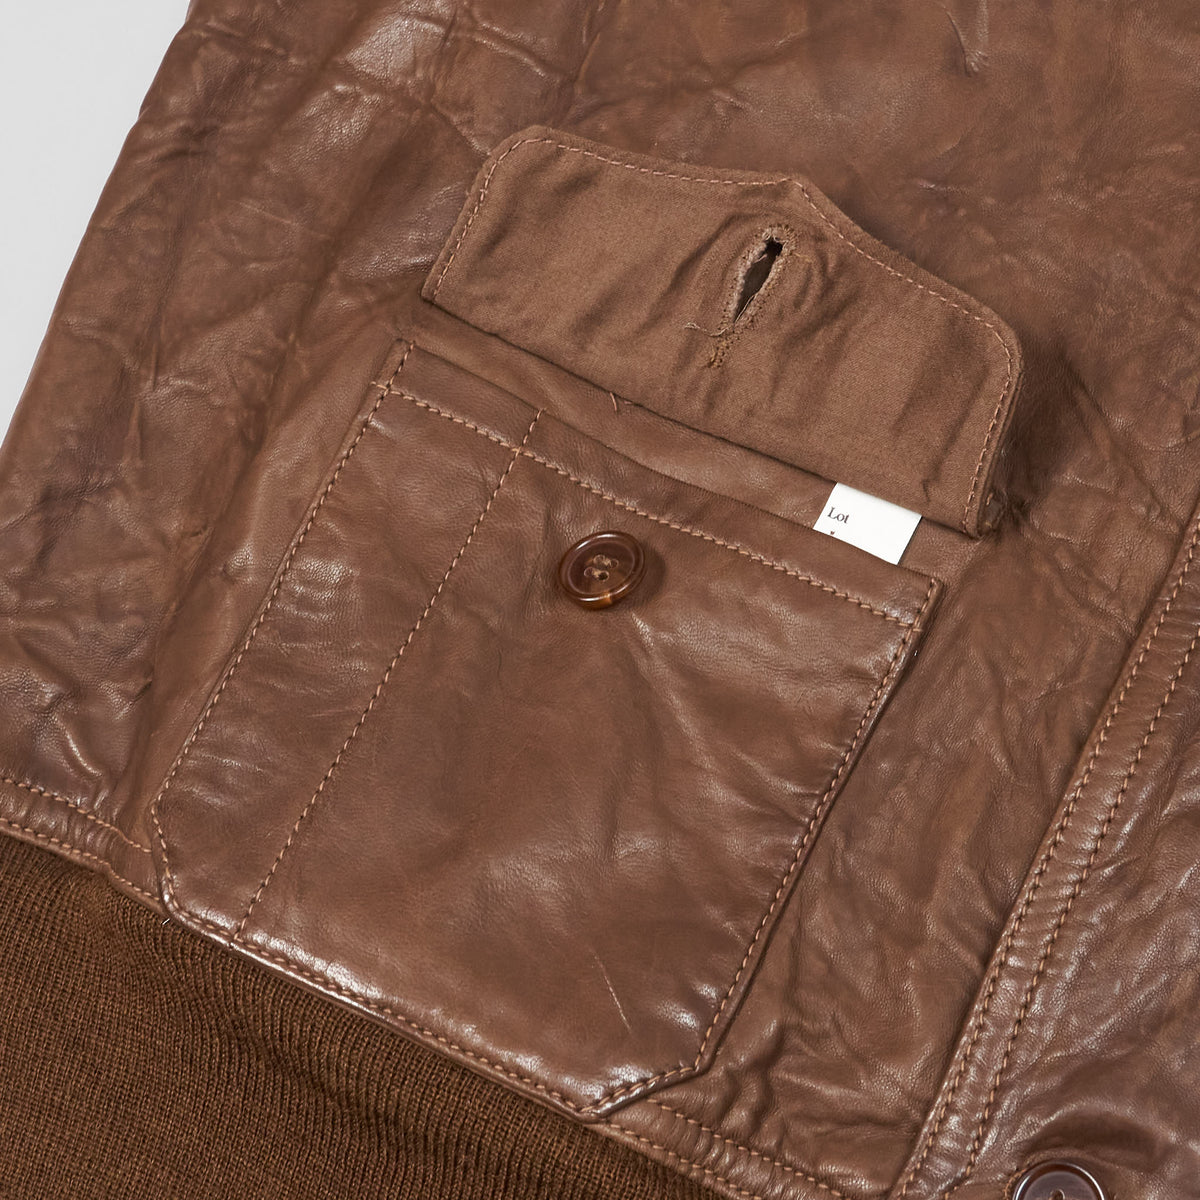 Eastman A-1 Leather Flying Jacket